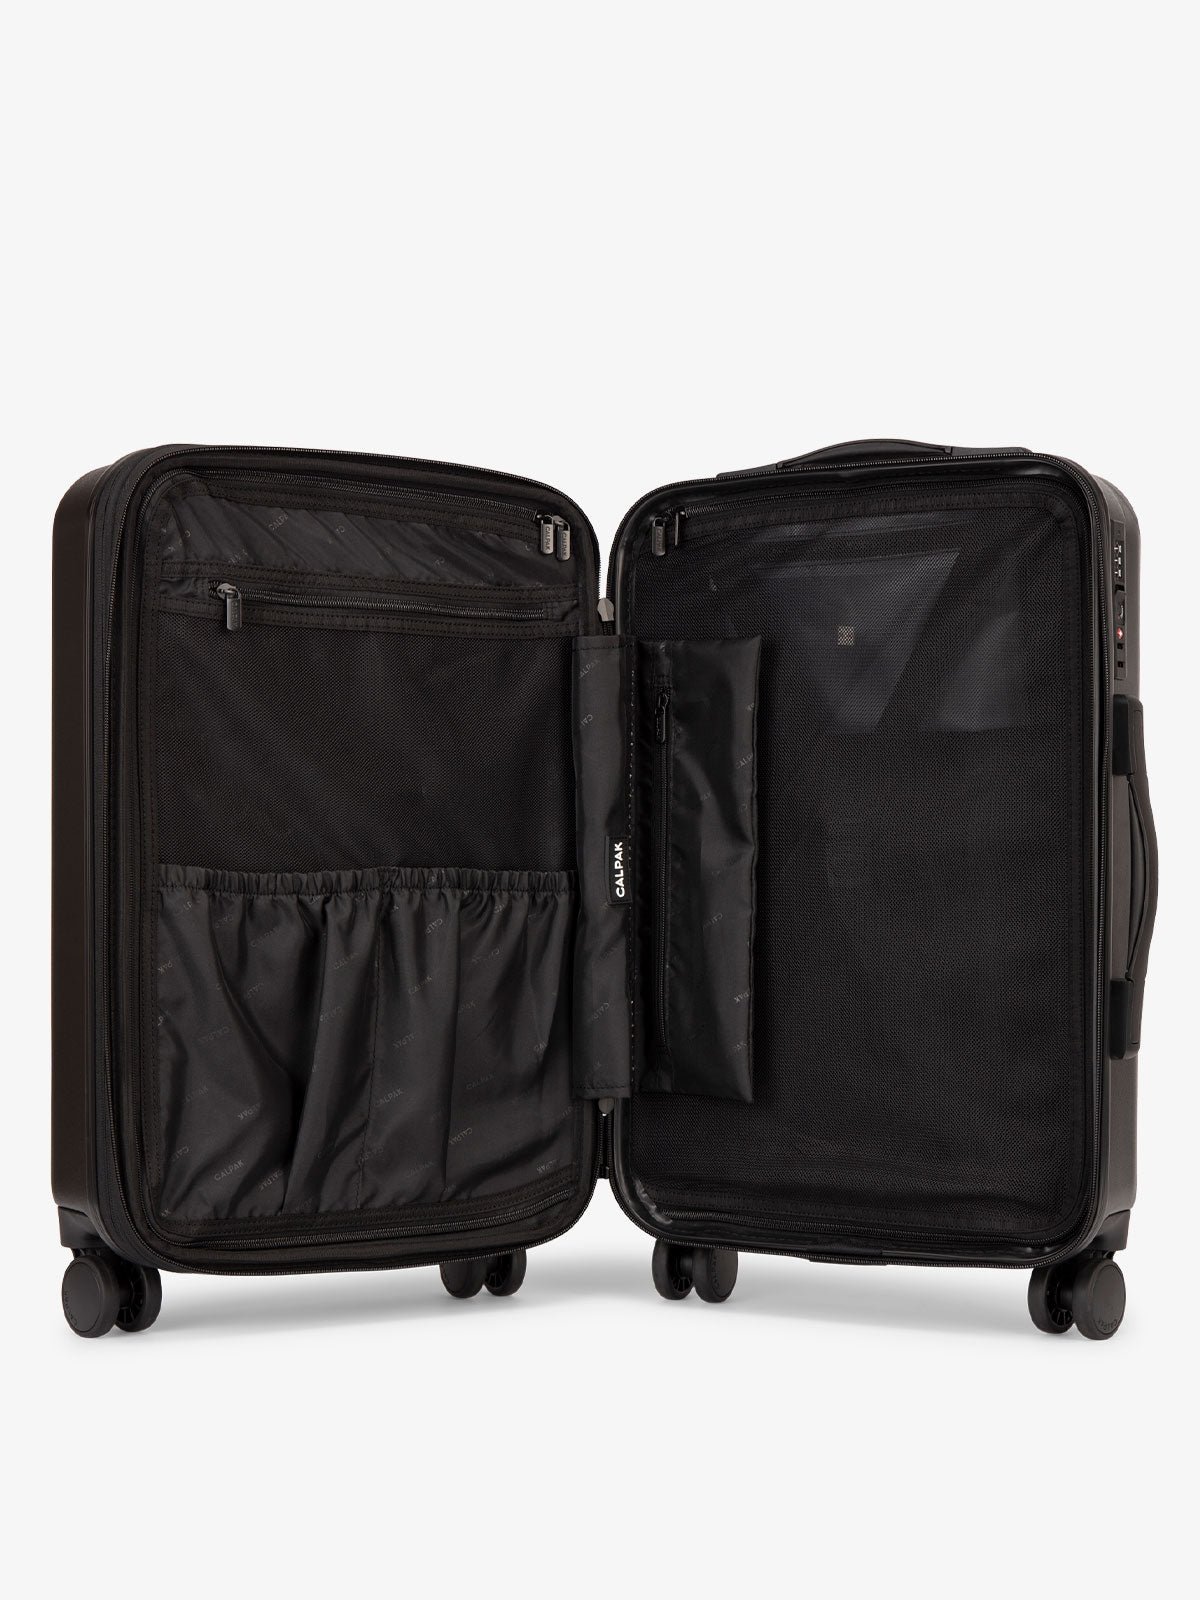 Black CALPAK Evry Medium Luggage features divided compartments with interior pockets for organized packing